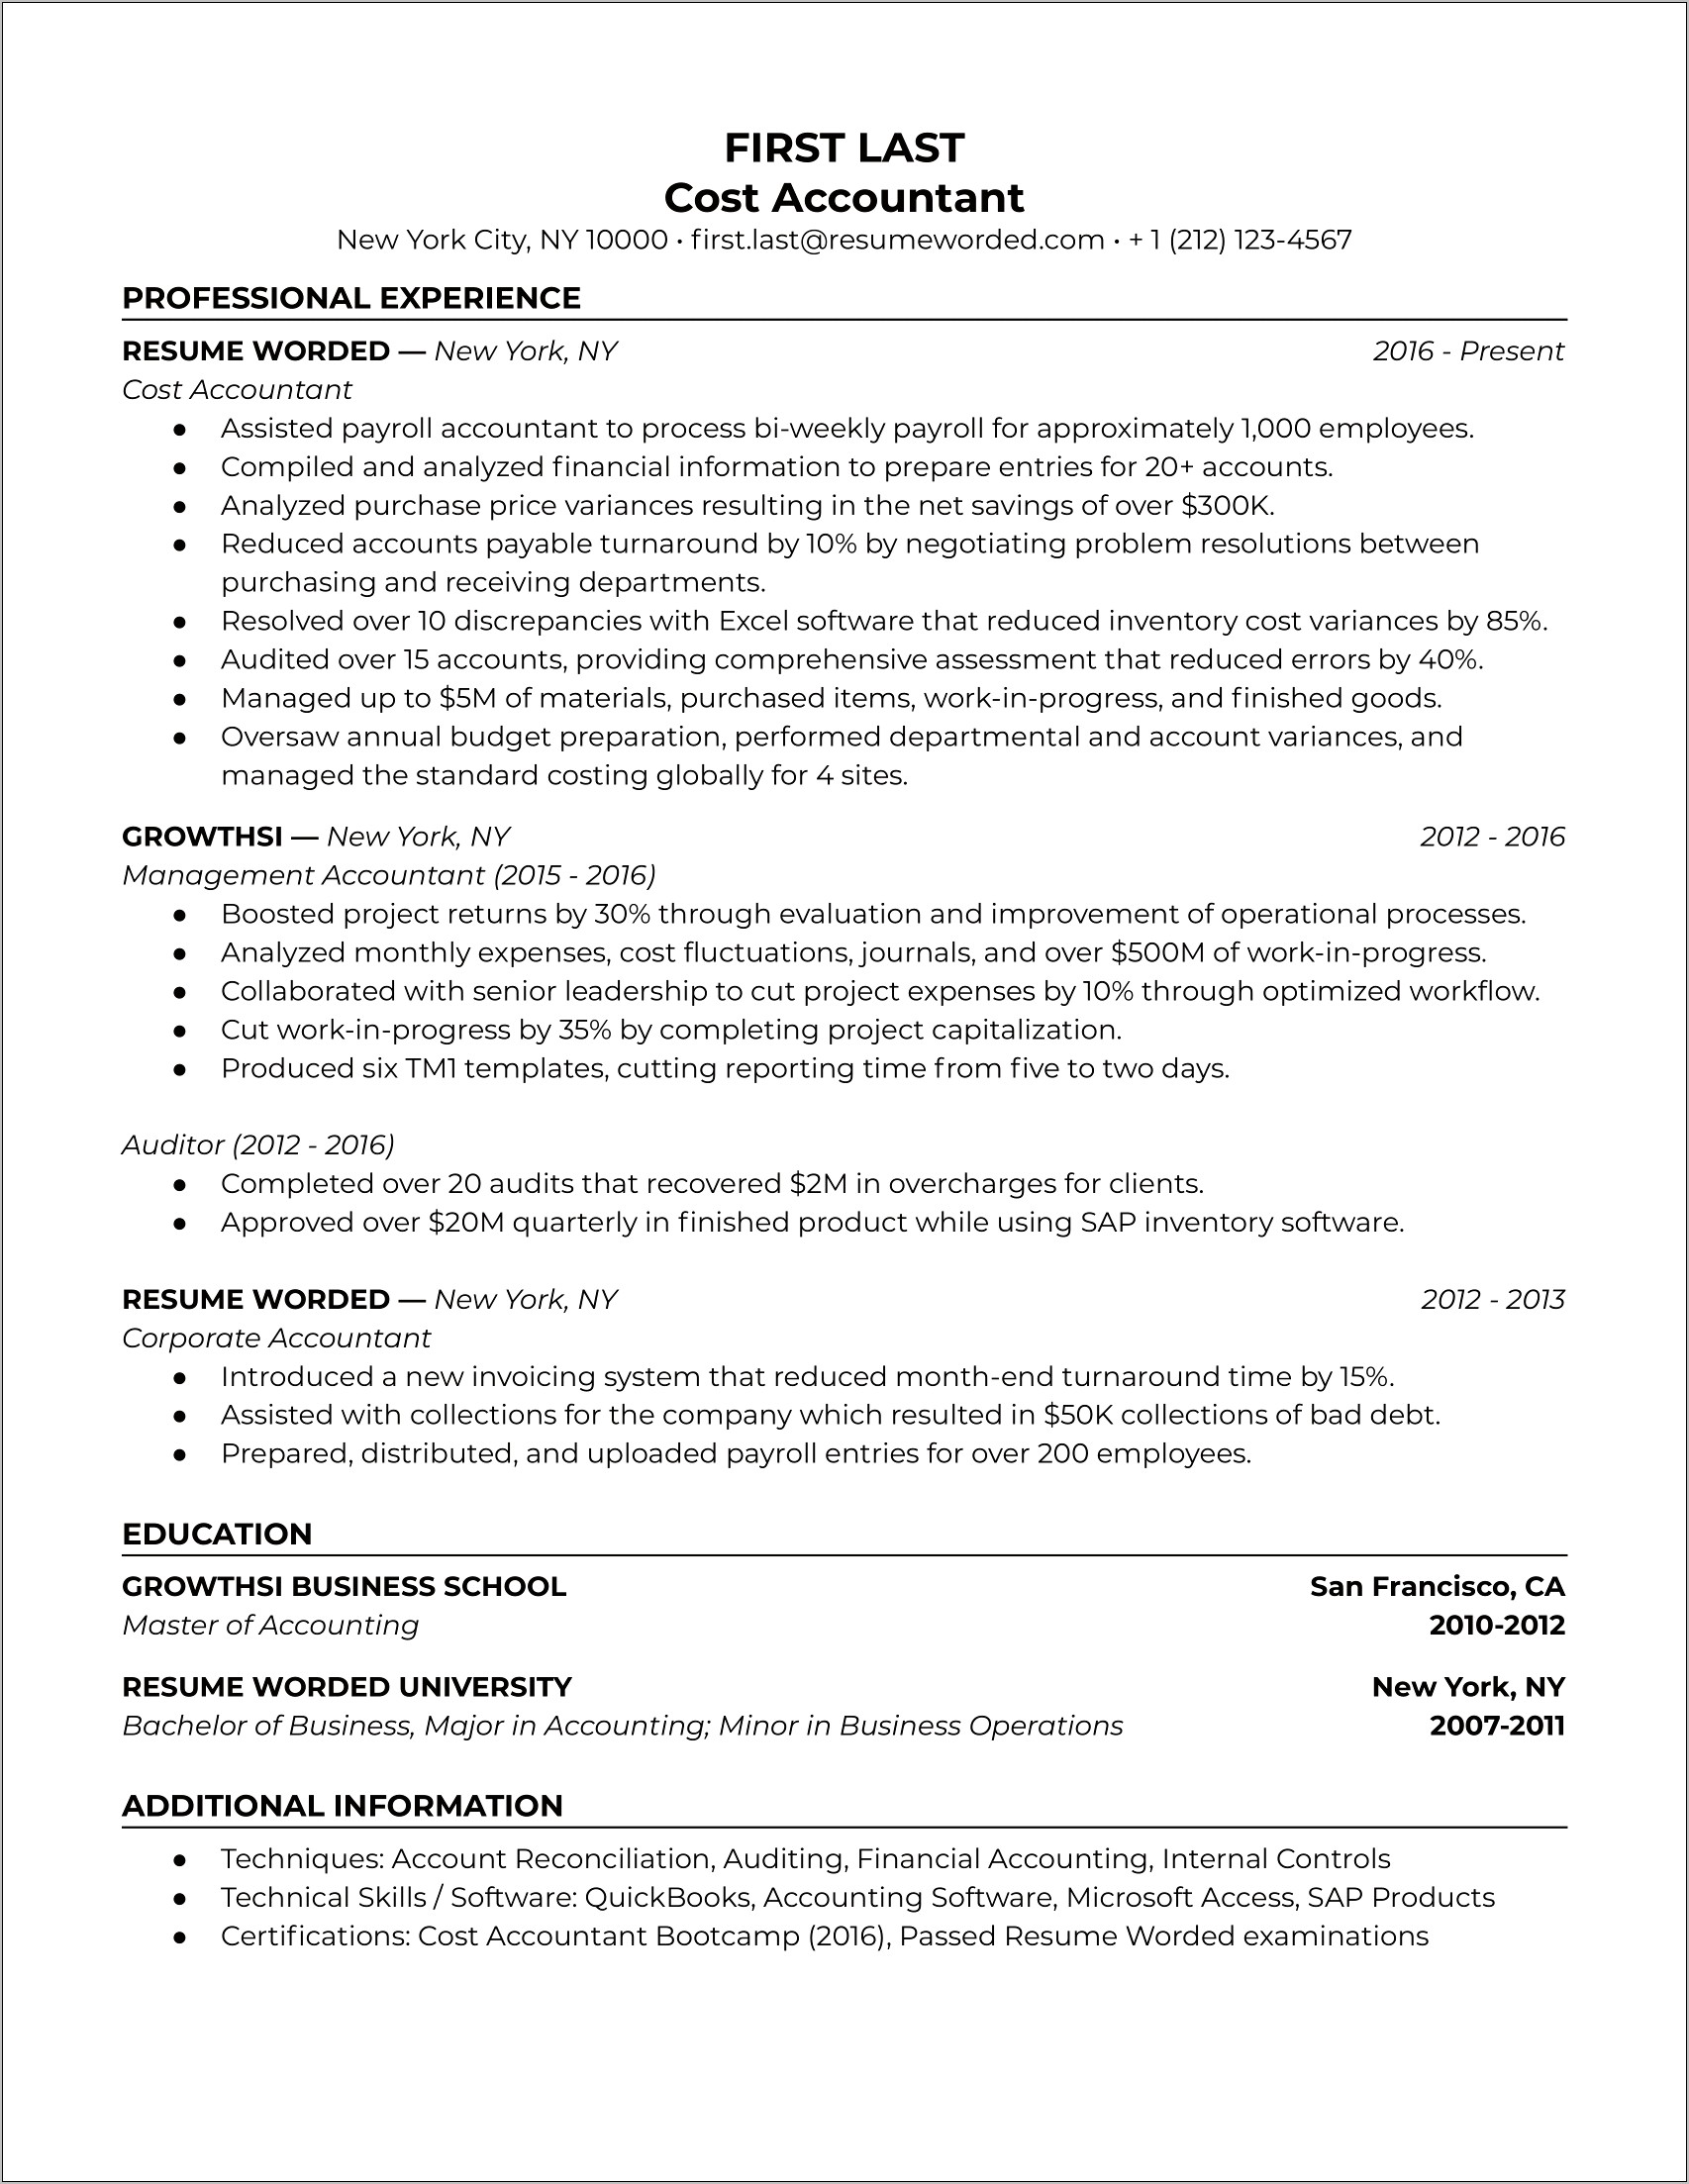 Professional Accountant Resume Format In Word